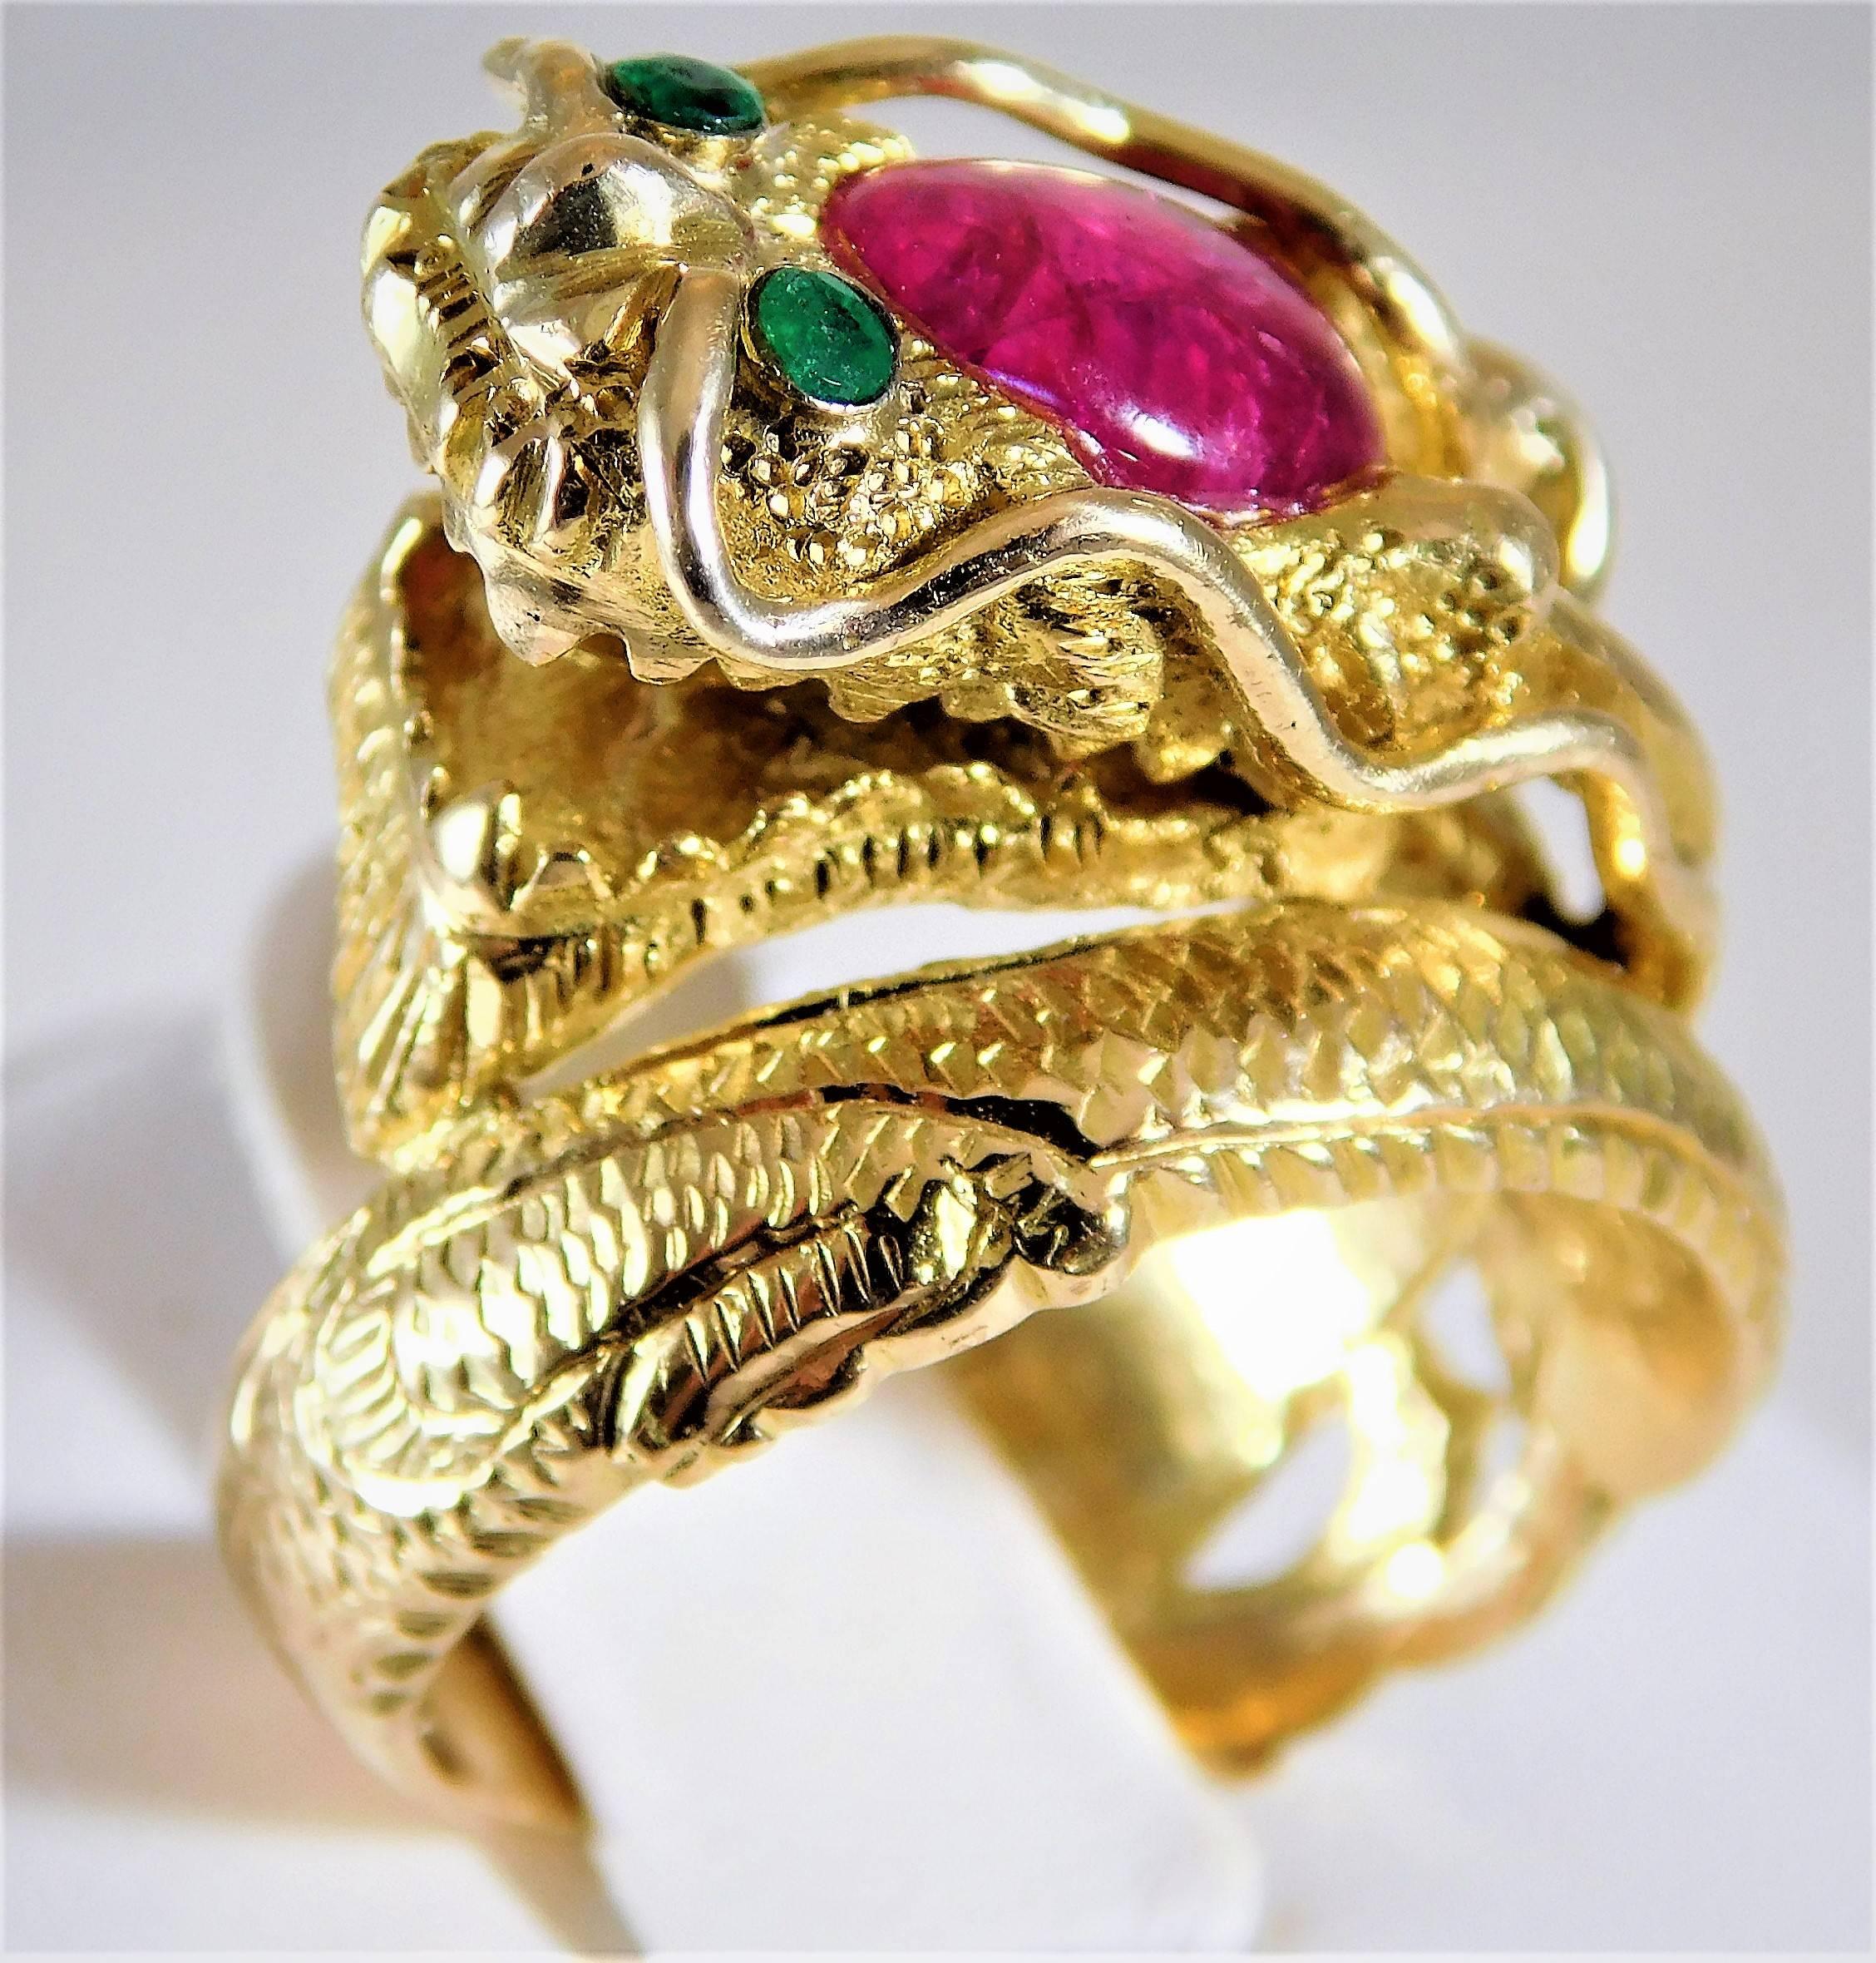 Ancient Chinese Dragons symbolize cosmic CHI (energy) and Good Fortune! From a worldly estate.  Circa 1960.  This absolutely amazing and unique ring has been hand crafted in solid 14k yellow gold.  The craftsmanship on this piece is extraordinary